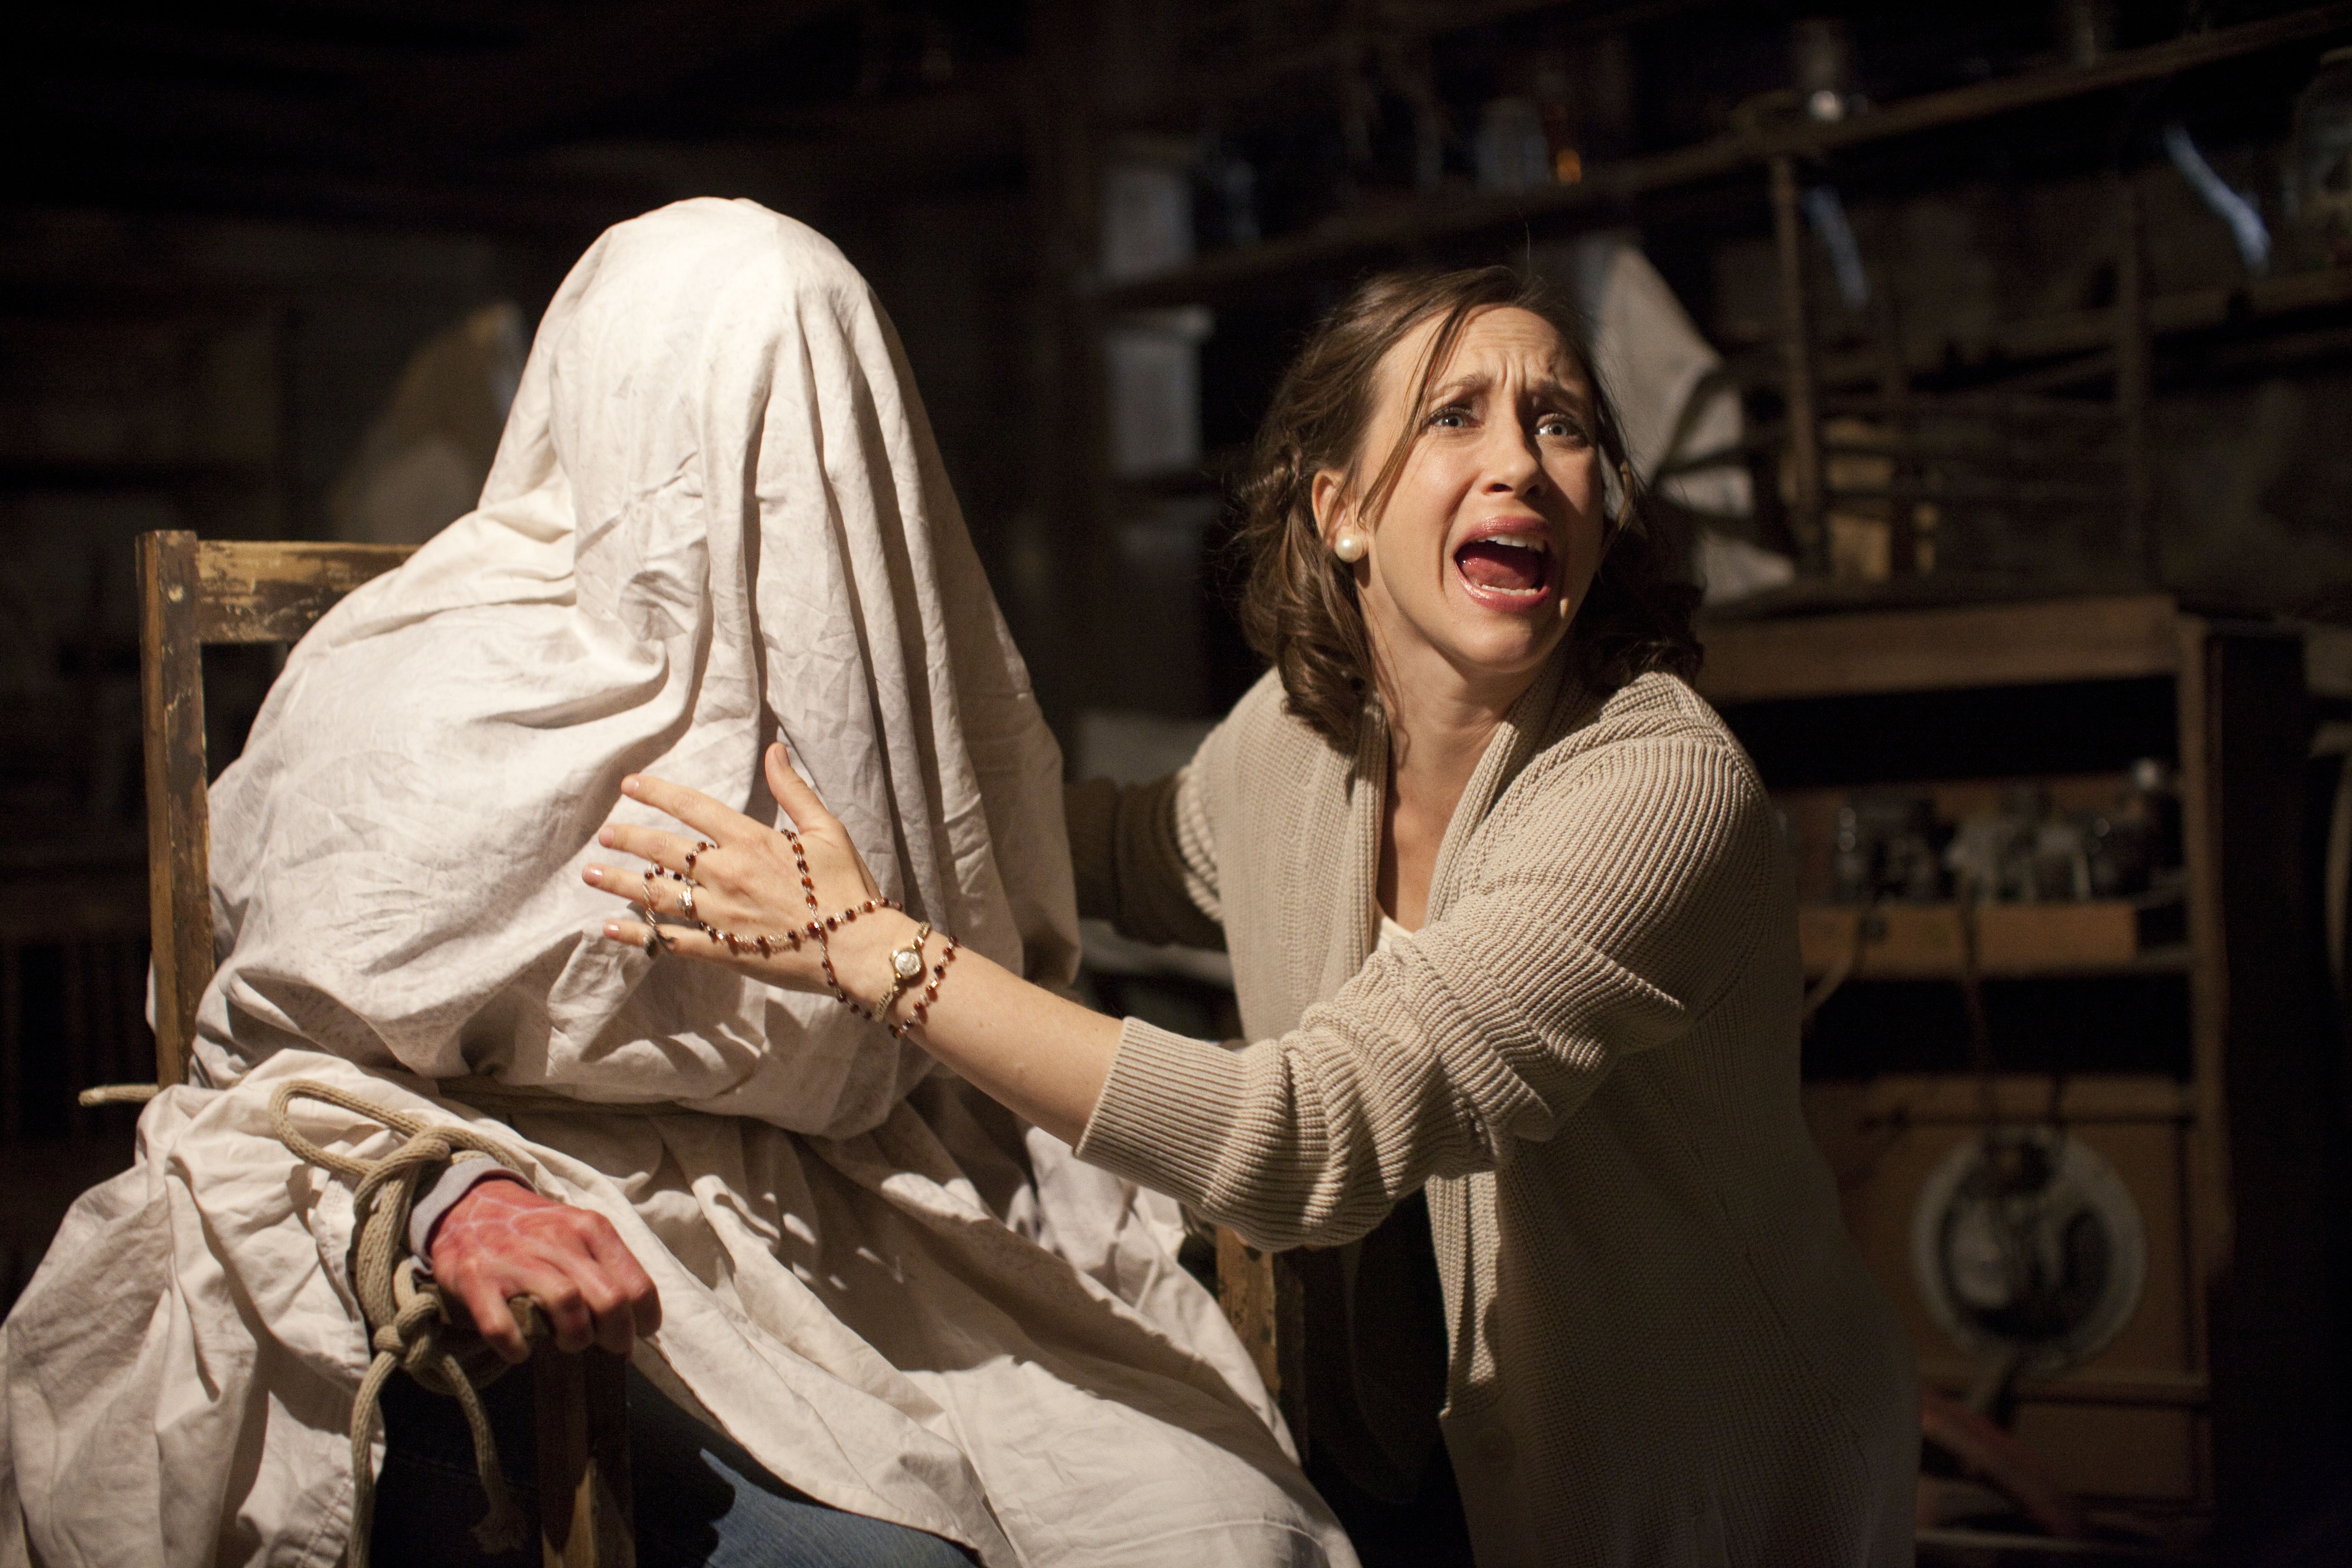 10 Things I Learned While Watching ‘The Conjuring’